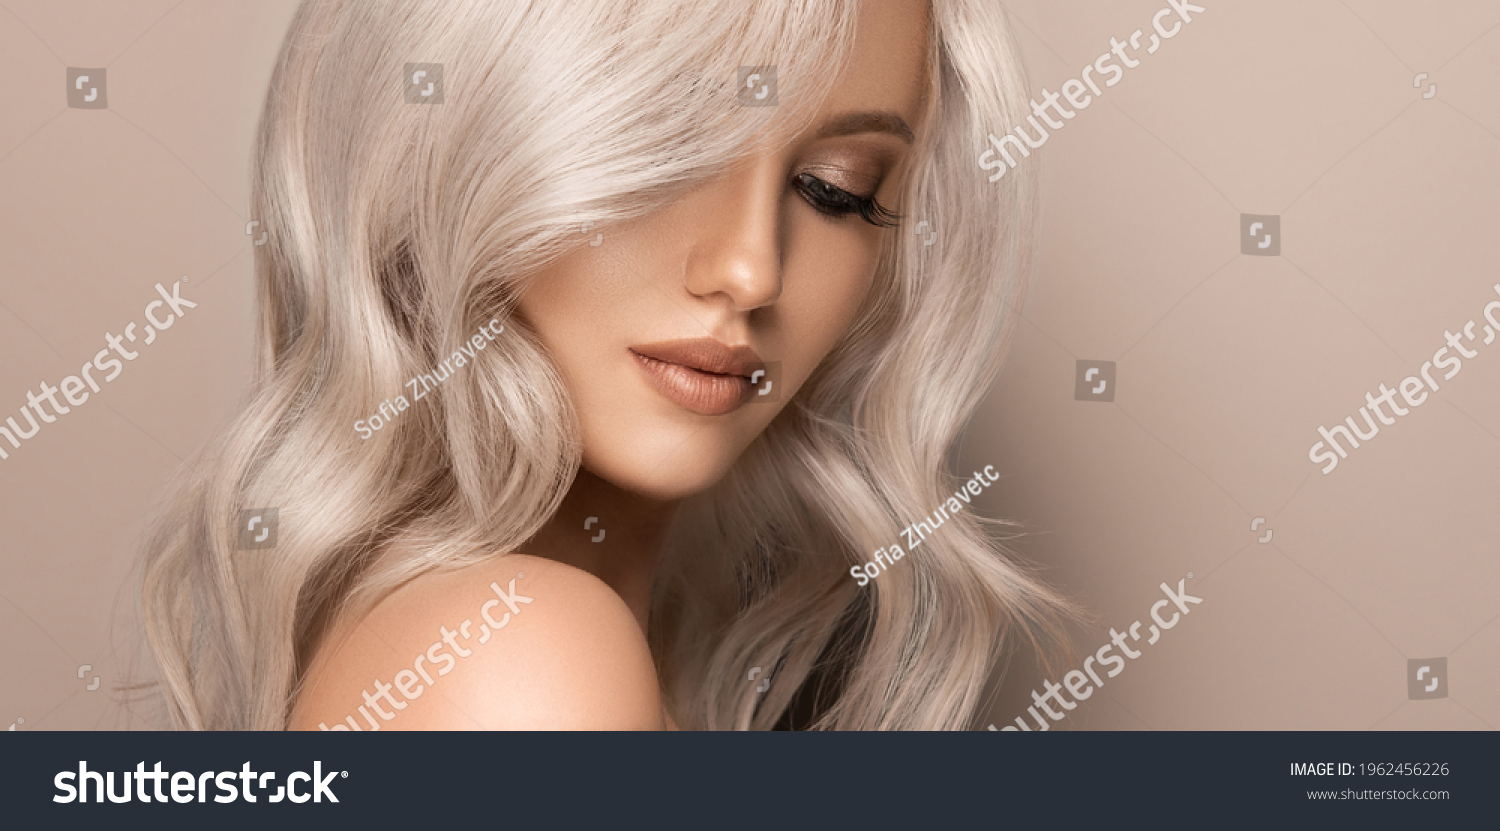 Beautiful girl with hair coloring in ultra blond. Stylish hairstyle curls done in a beauty salon. Fashion, cosmetics and makeup #1962456226